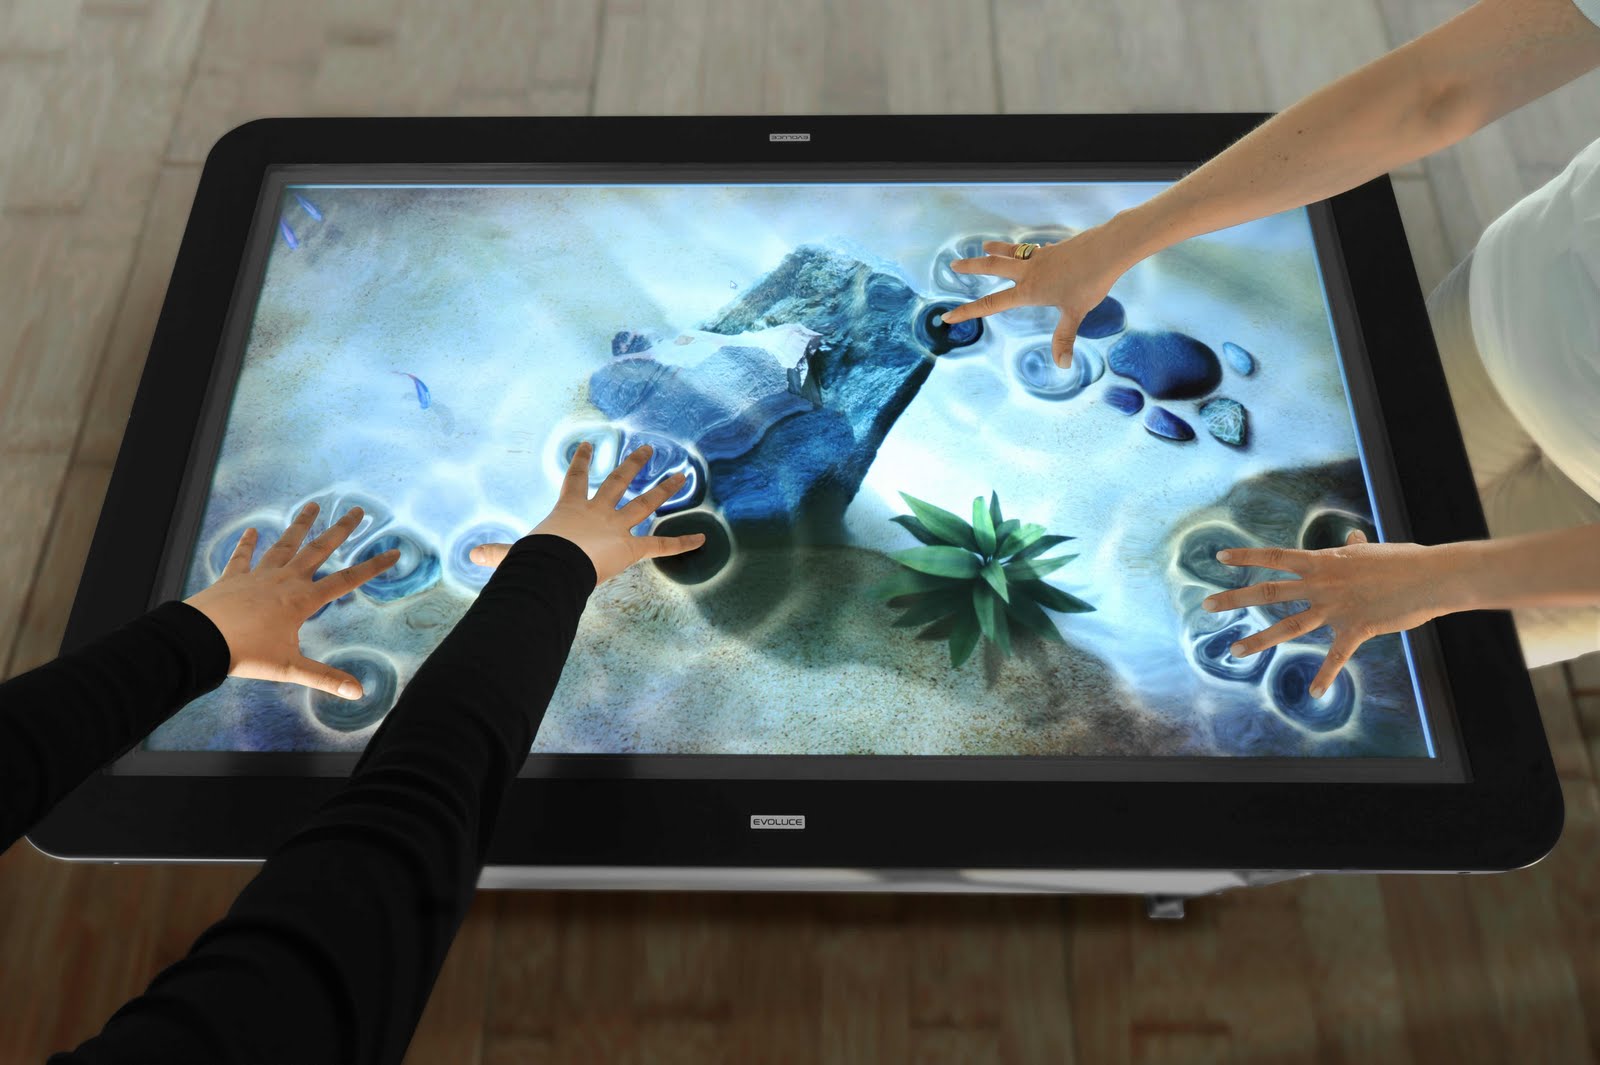 ... Embedded Blog True Gesture Multitouch For Large Lcd Displays wallpaper